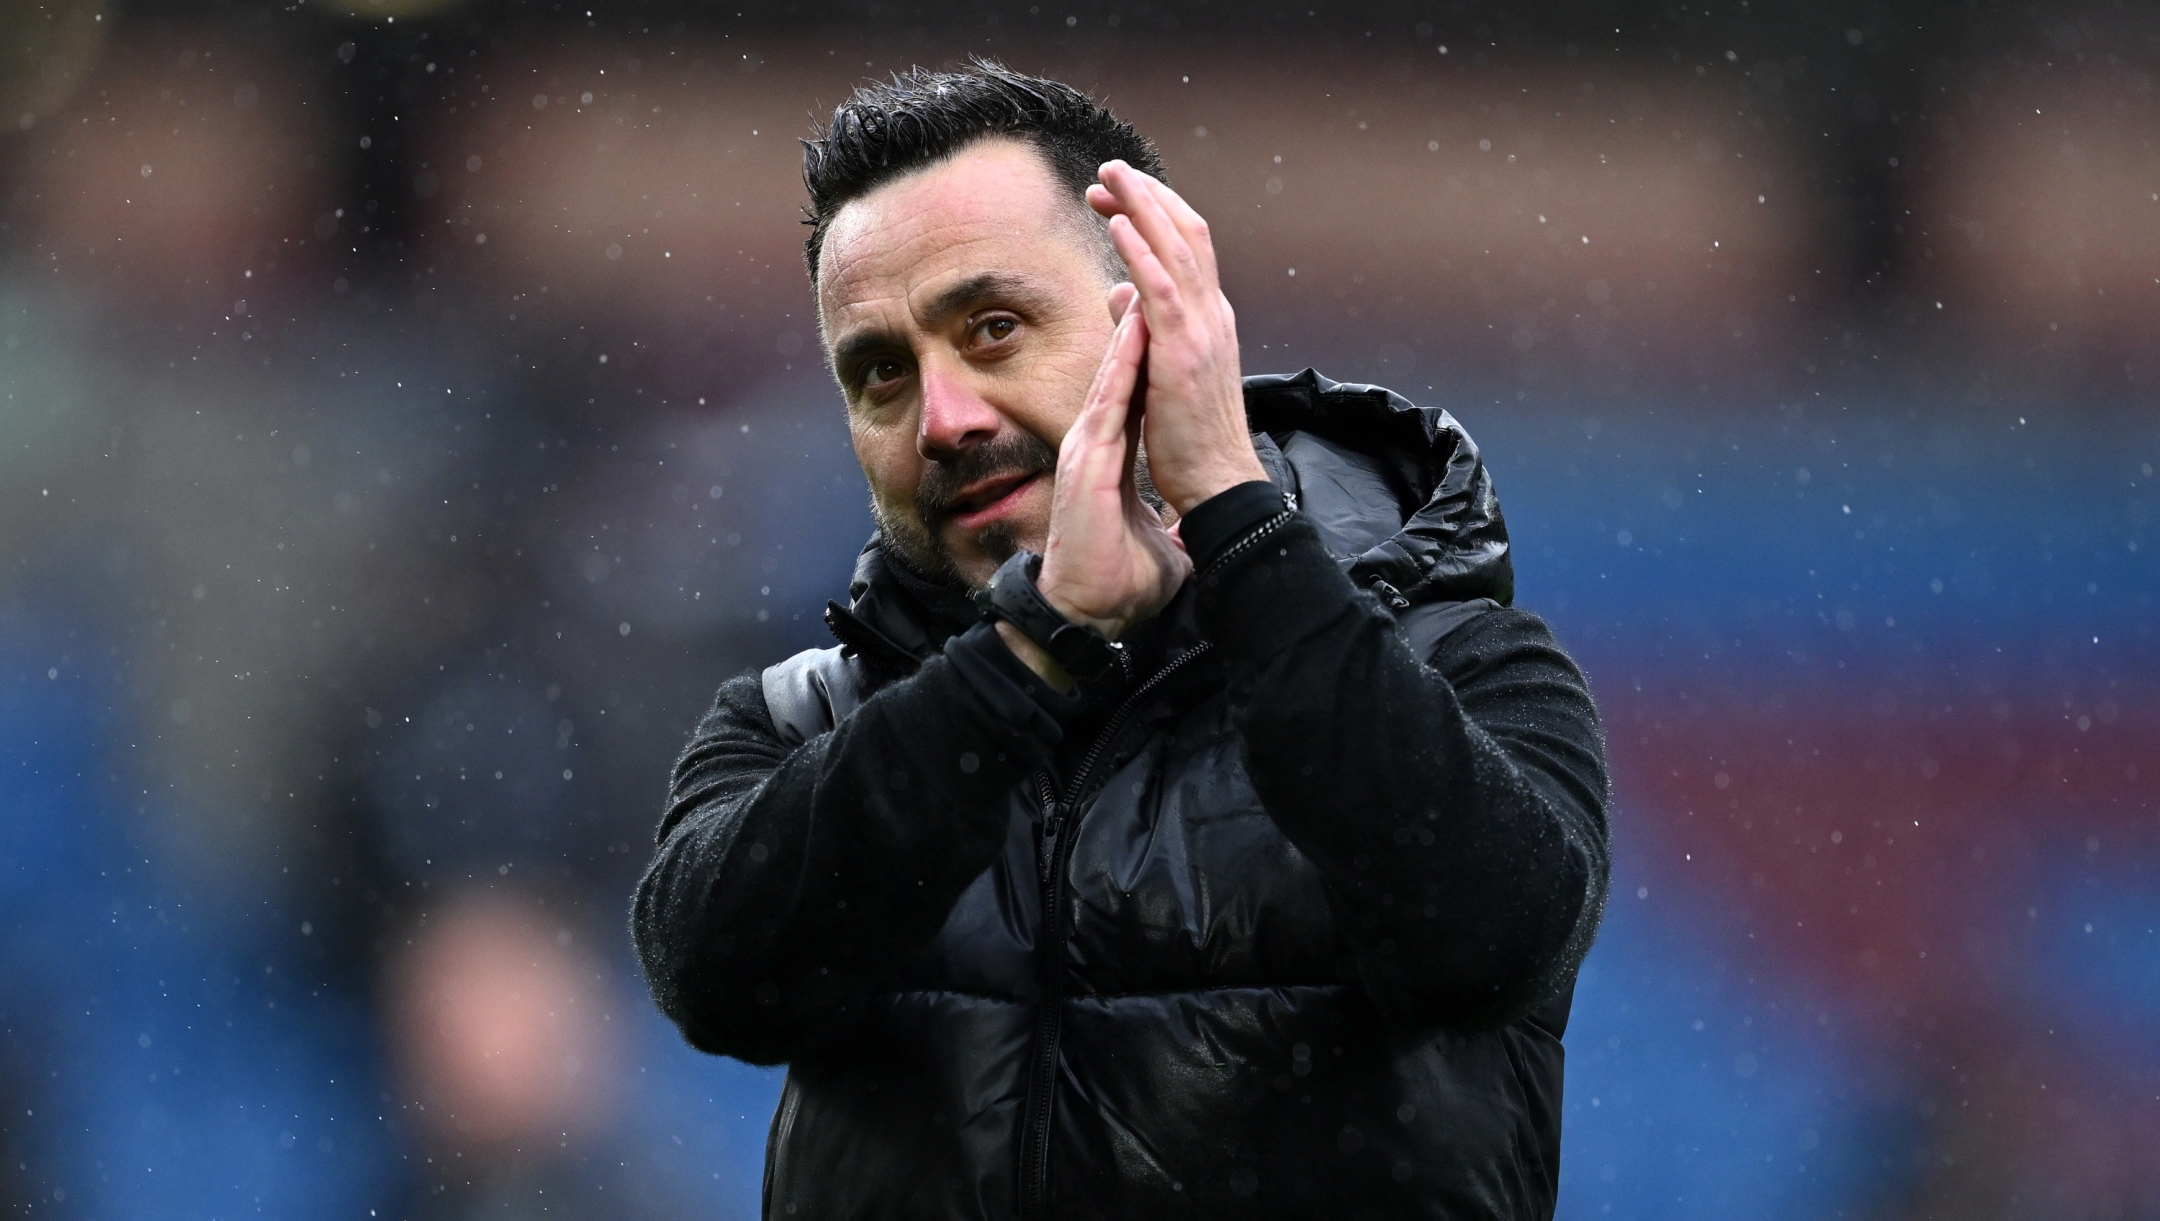 BURNLEY, ENGLAND - APRIL 13: Roberto De Zerbi, Manager of Brighton & Hove Albion, applauds the fans after the draw in the Premier League match between Burnley FC and Brighton & Hove Albion at Turf Moor on April 13, 2024 in Burnley, England. (Photo by Gareth Copley/Getty Images) (Photo by Gareth Copley/Getty Images)